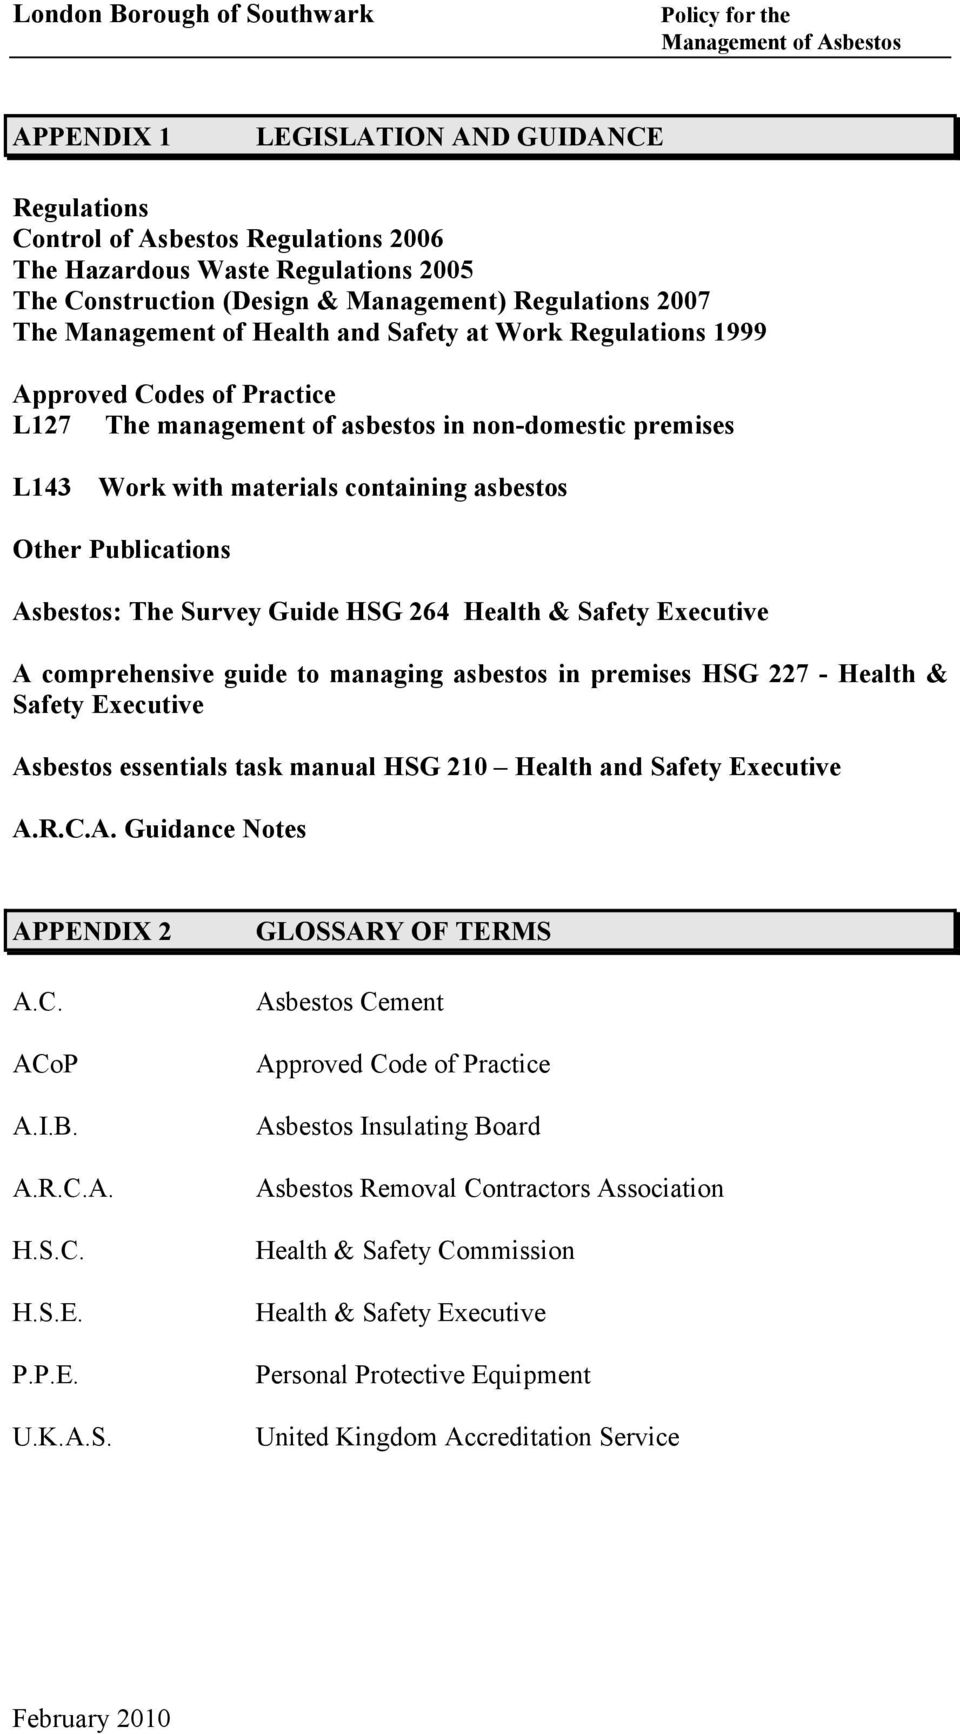 asbestos Other Publications Asbestos: The Survey Guide HSG 264 Health & Safety Executive A comprehensive guide to managing asbestos in premises HSG 227 - Health & Safety Executive Asbestos essentials